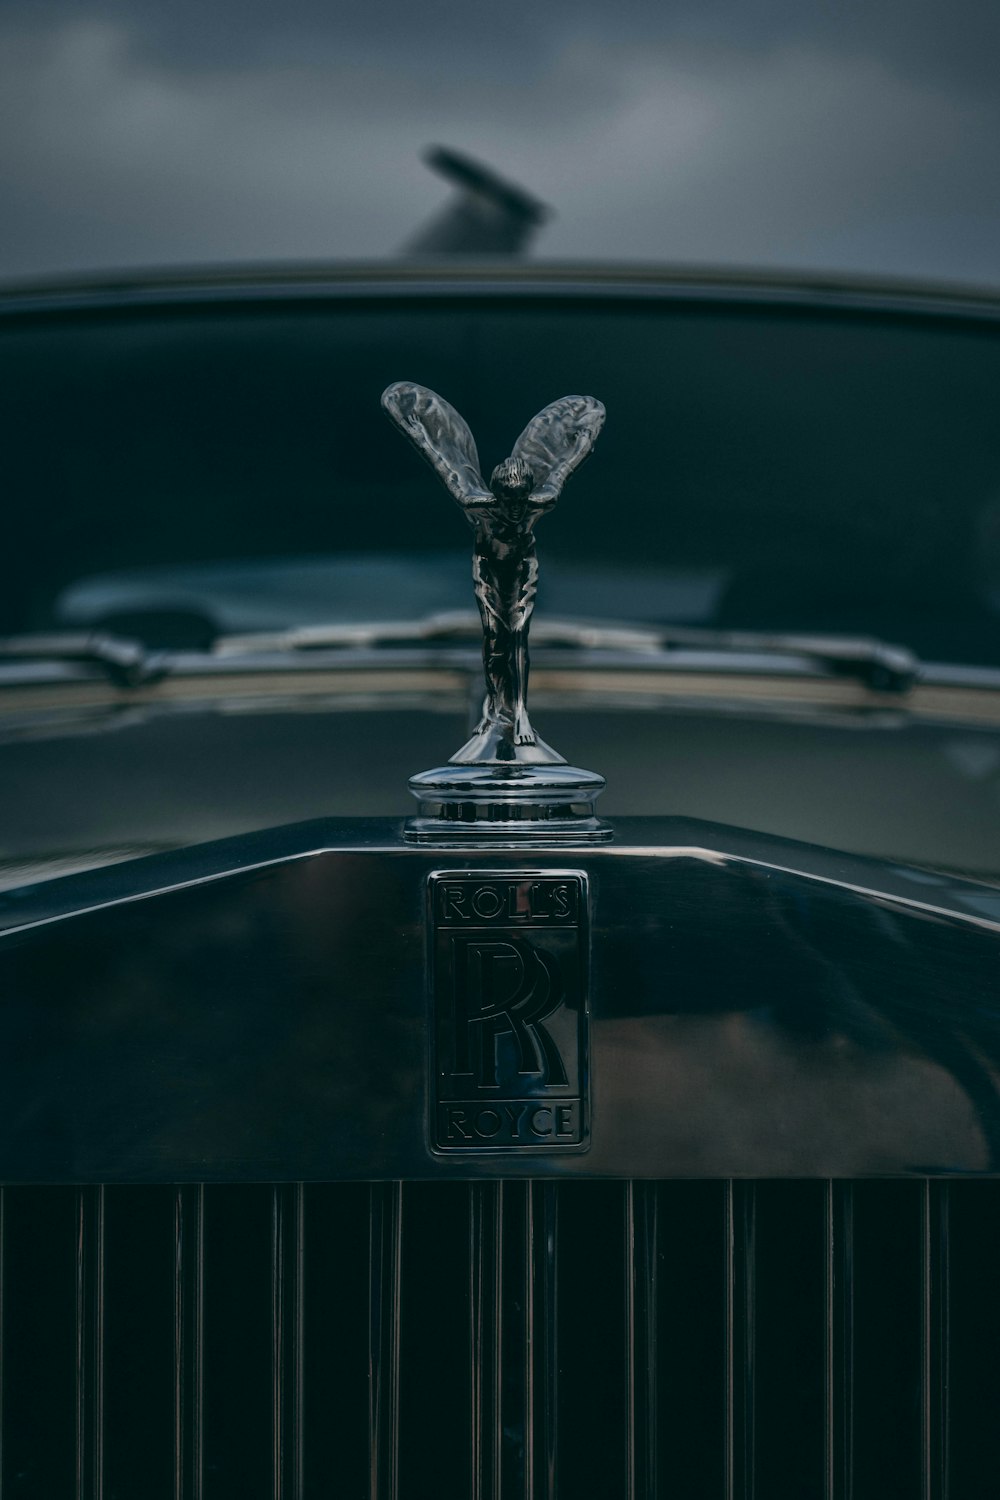 Rollsroyce Pictures | Download Free Images on Unsplash